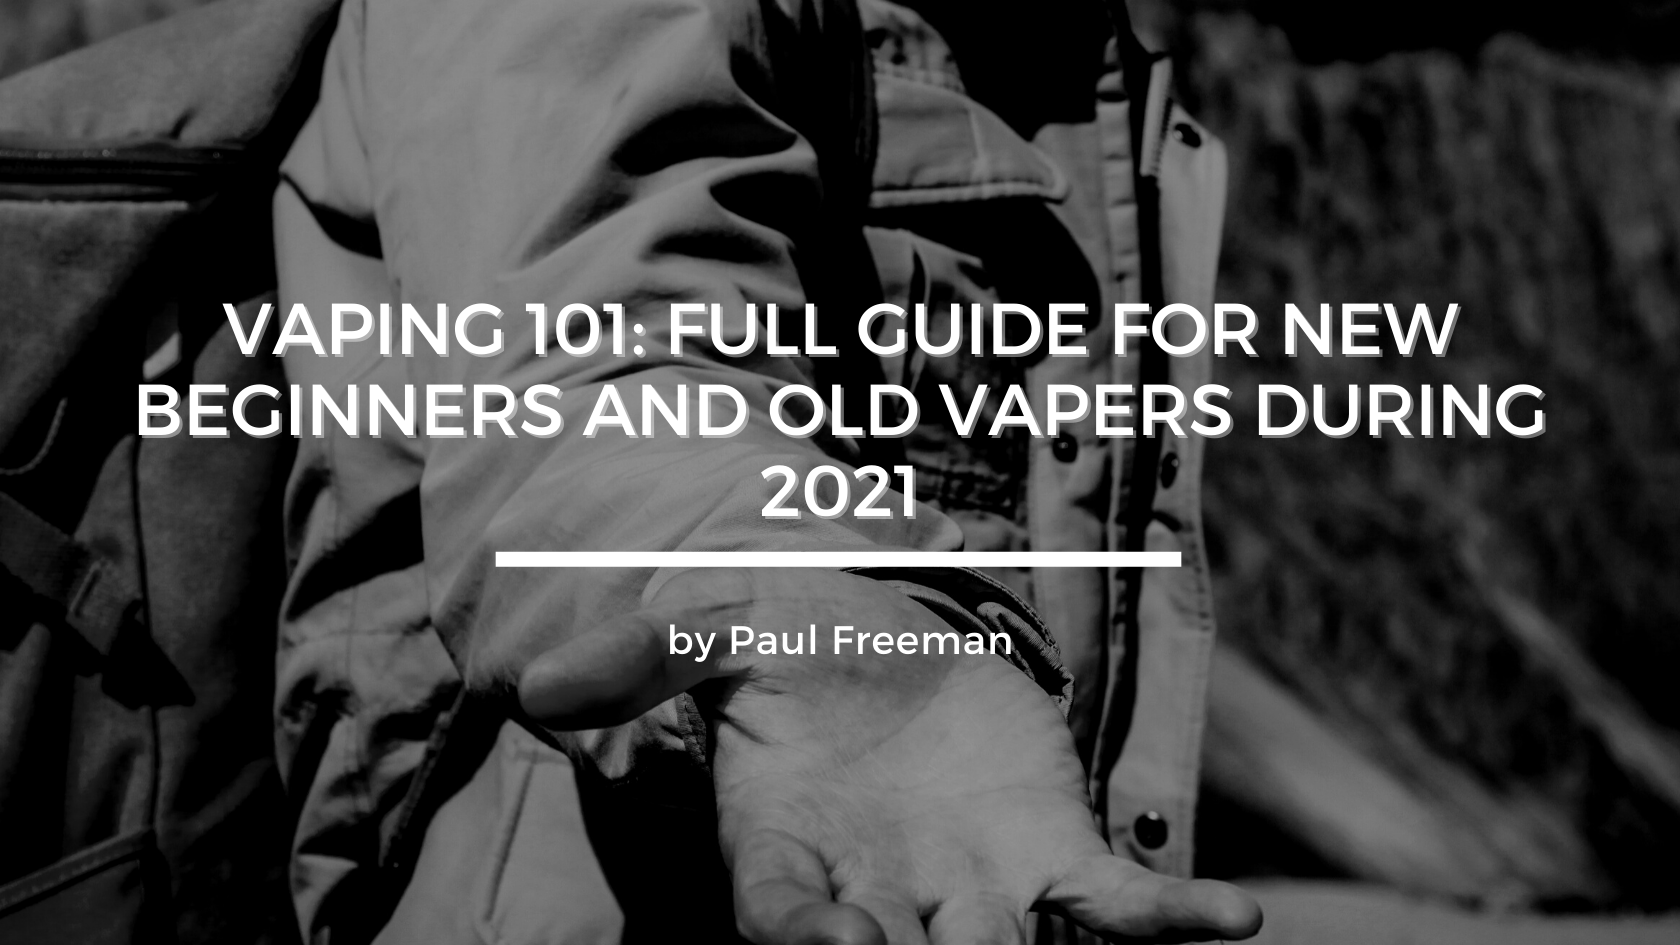 Vaping 101: Full Guide for New Beginners and Old Vapers during 2021